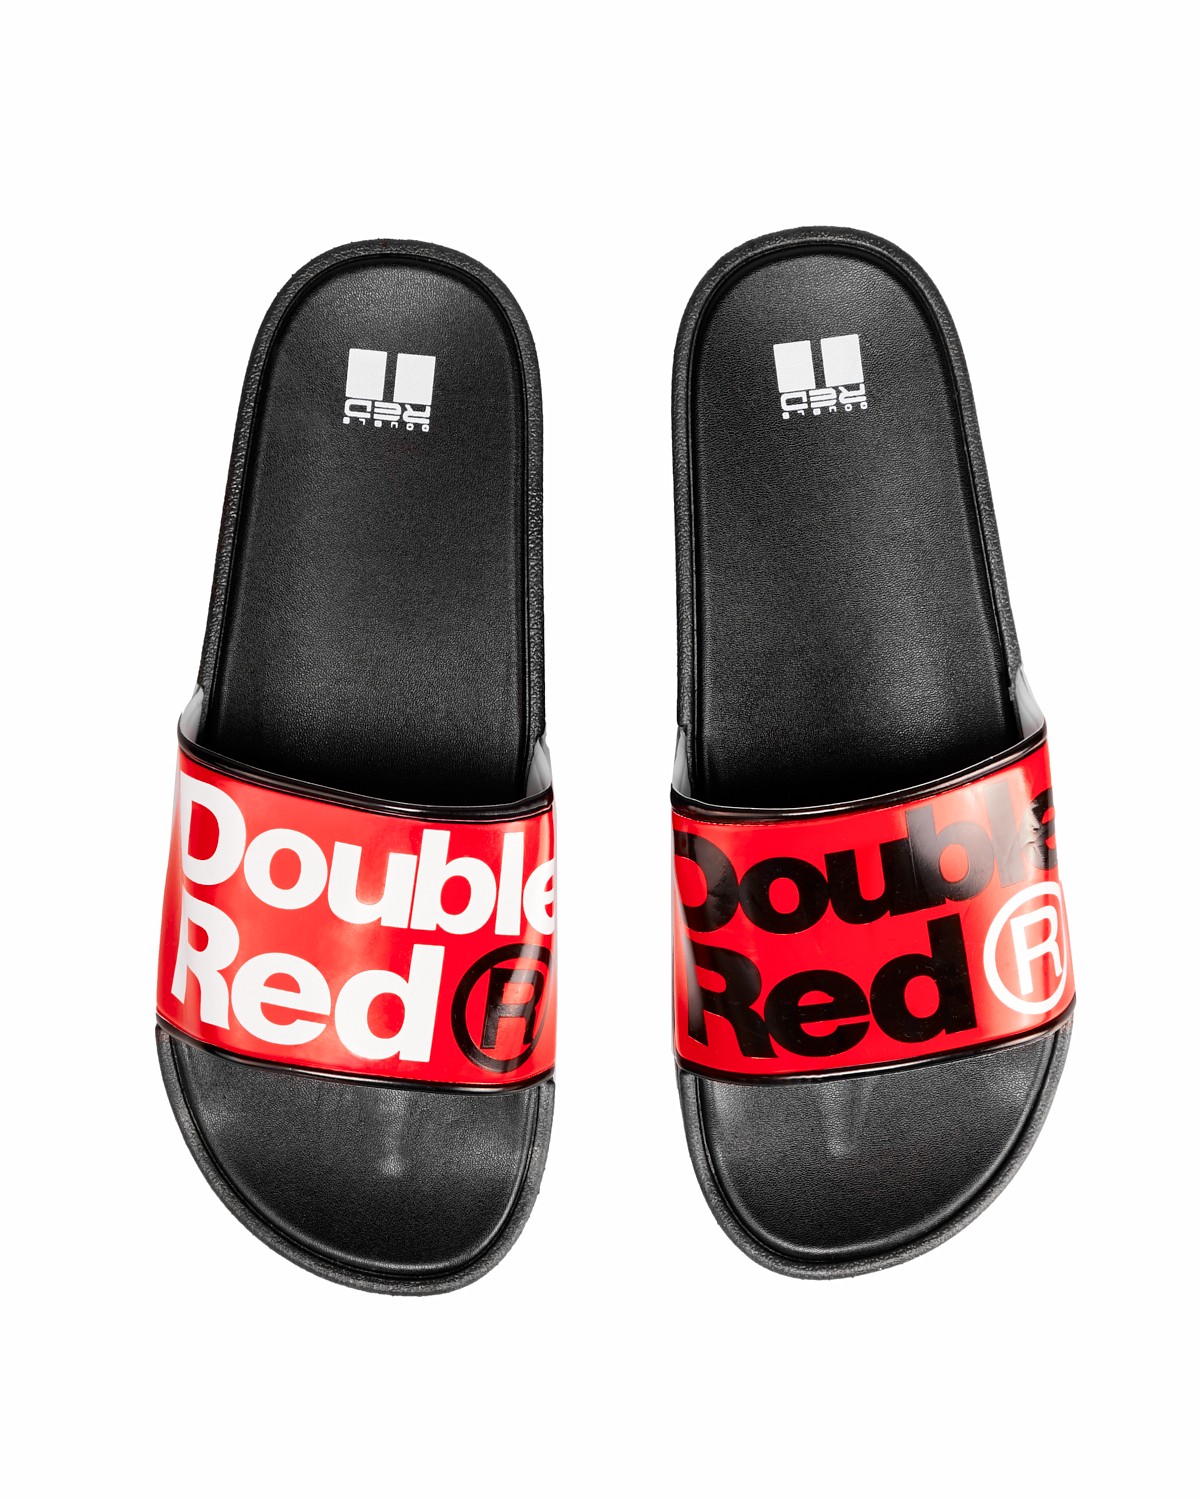 Classic DOUBLE RED Slippers Black